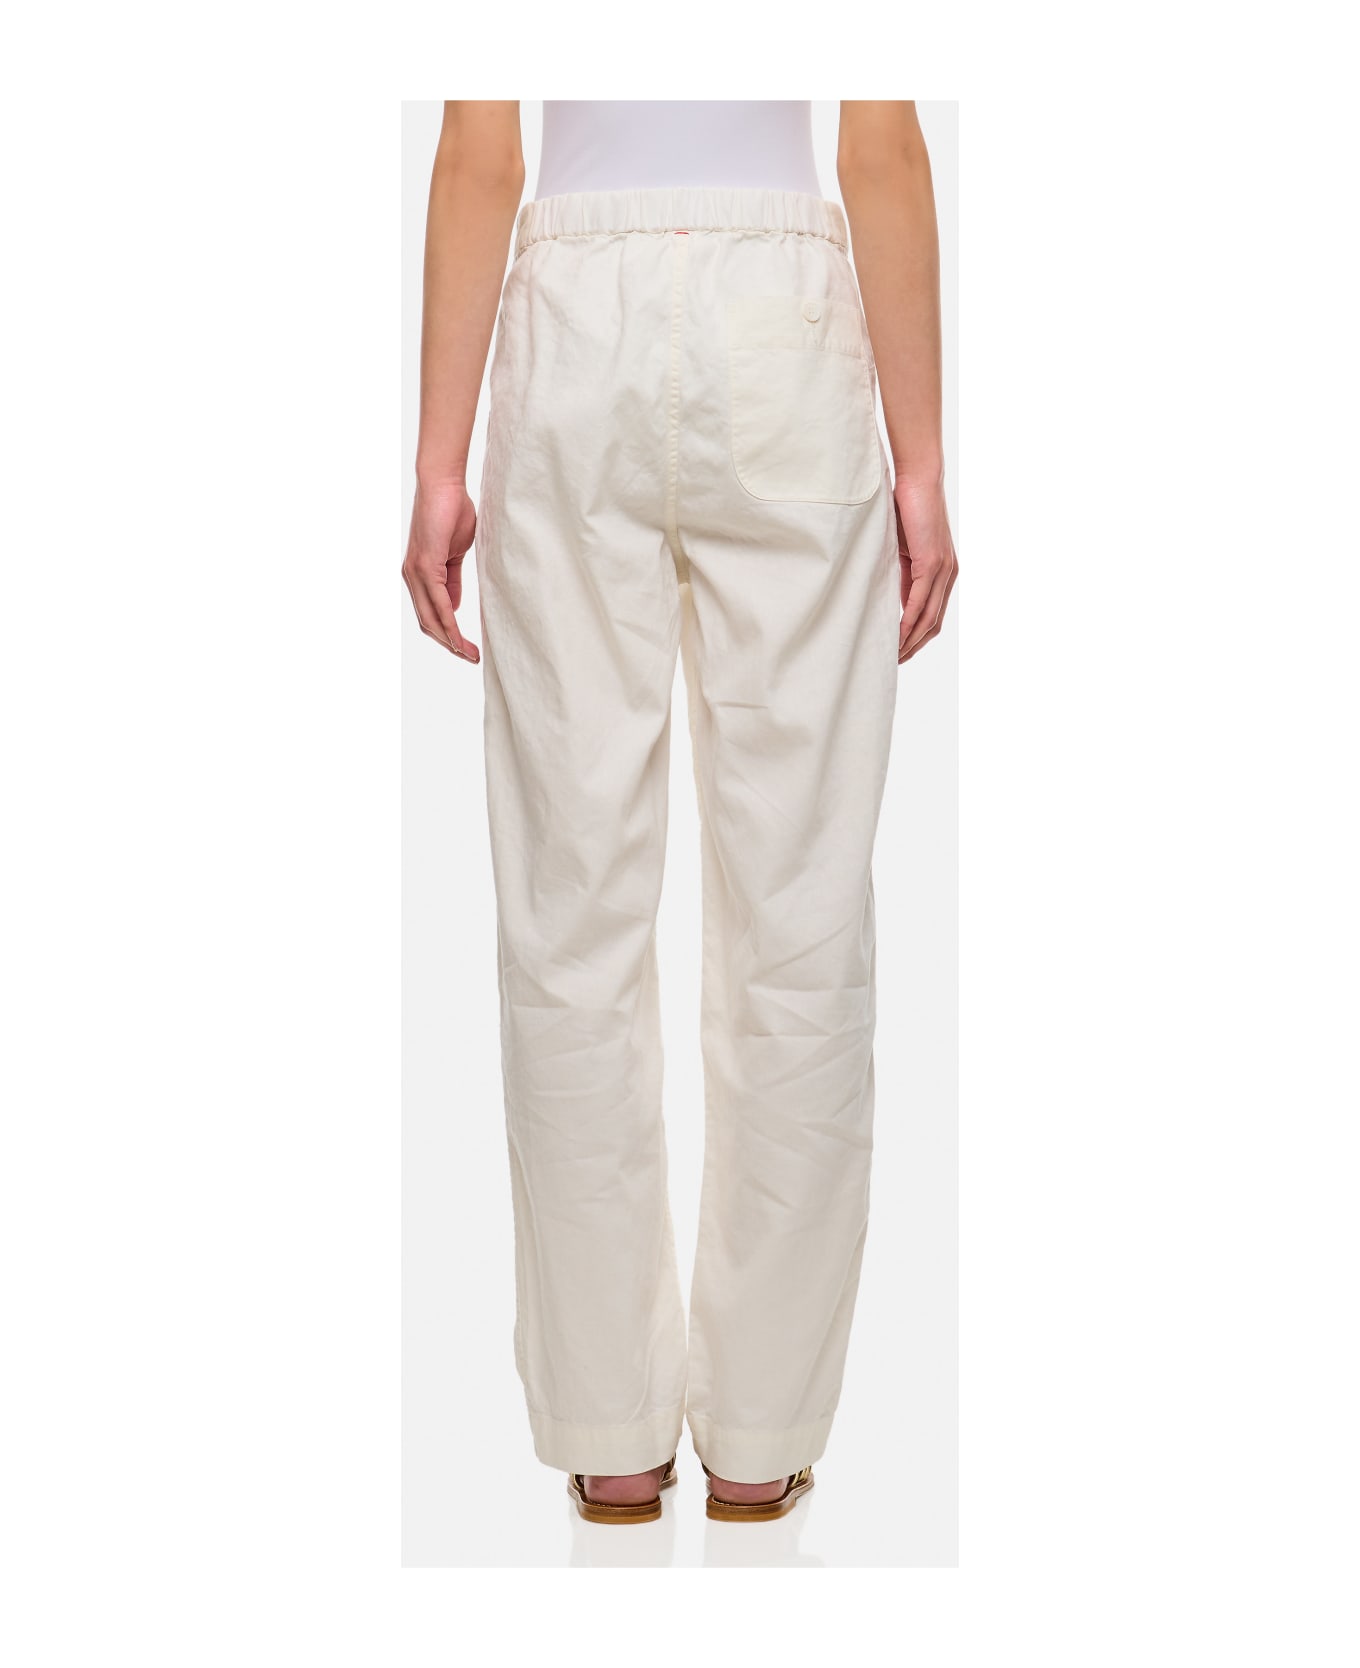 Casey Casey Jude Femme Cotton And Linen Pants - White